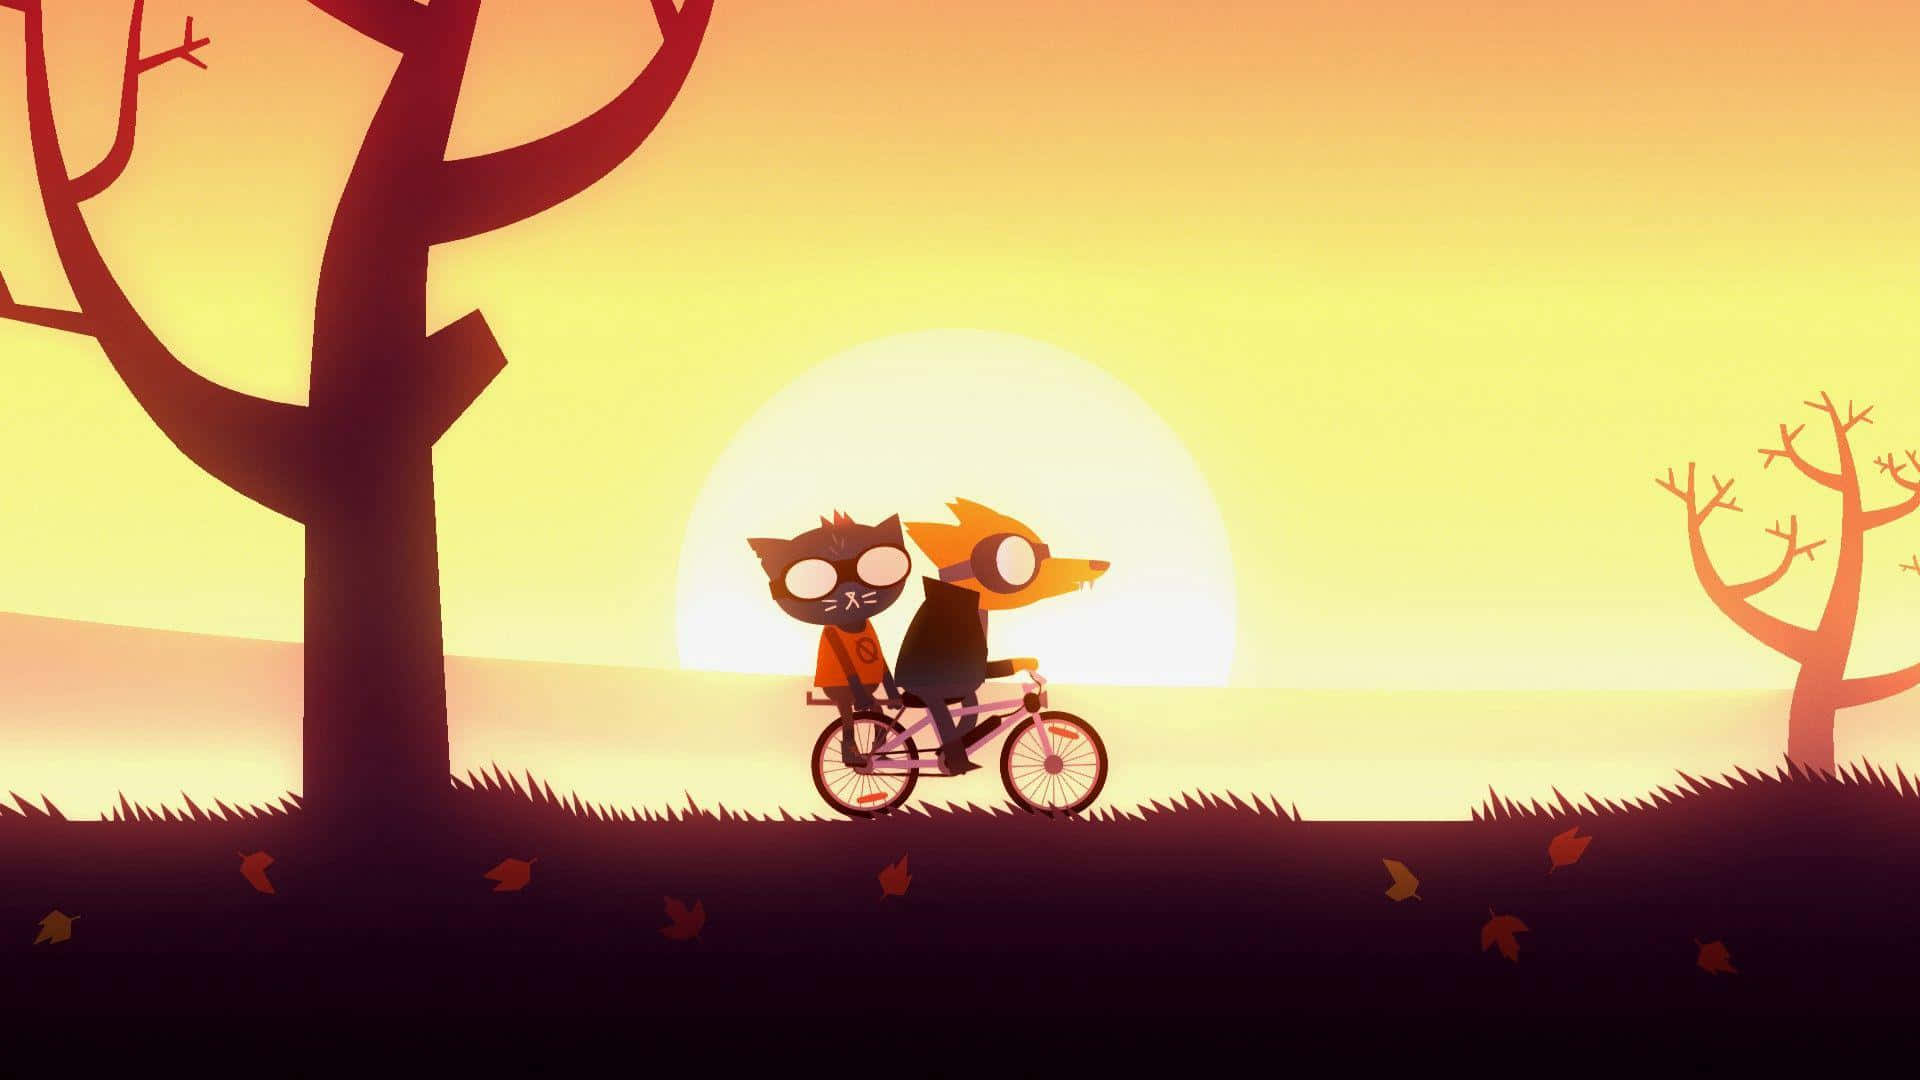 An adventurous night awaits the adventurers in Night in the Woods Wallpaper